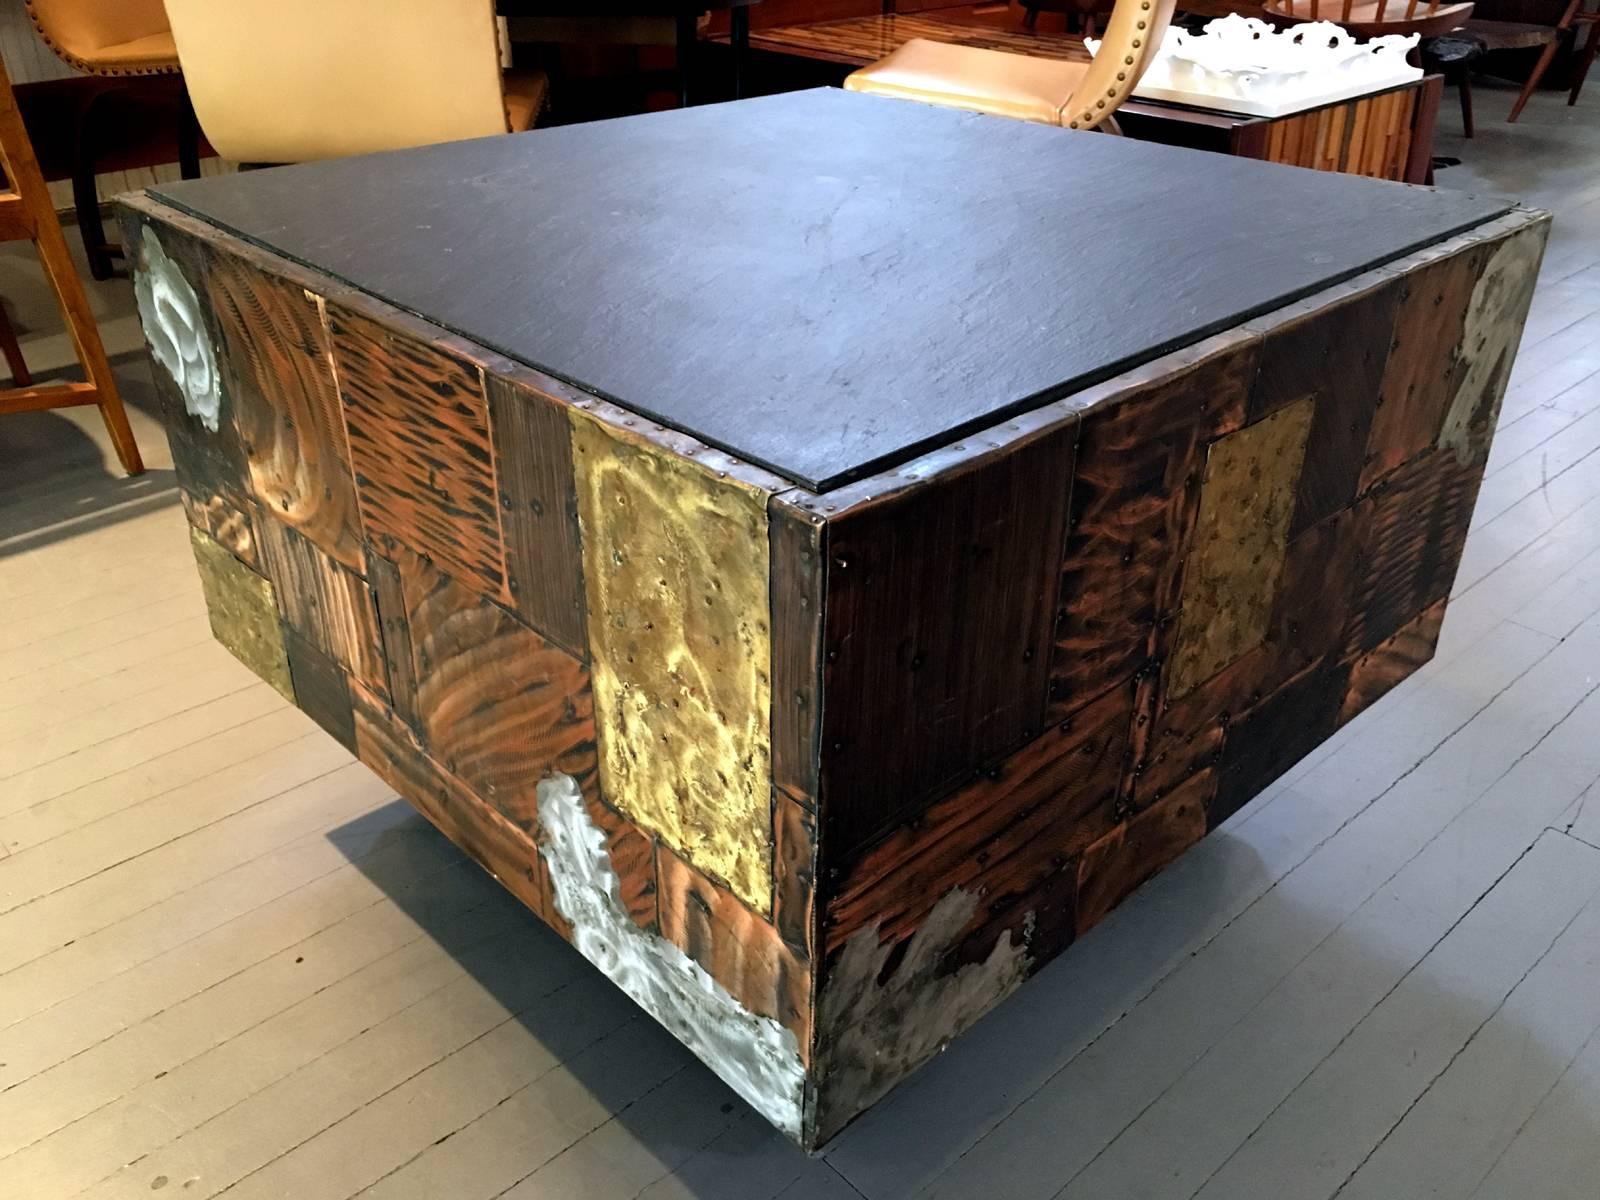 A beautiful table with signature metal patchwork crafted by Paul Evans in 1970s for Directional. Metal veneer consists of a variety of material such as copper, hammered brass and splashes of pewter, artistically patched with visible nail heads.